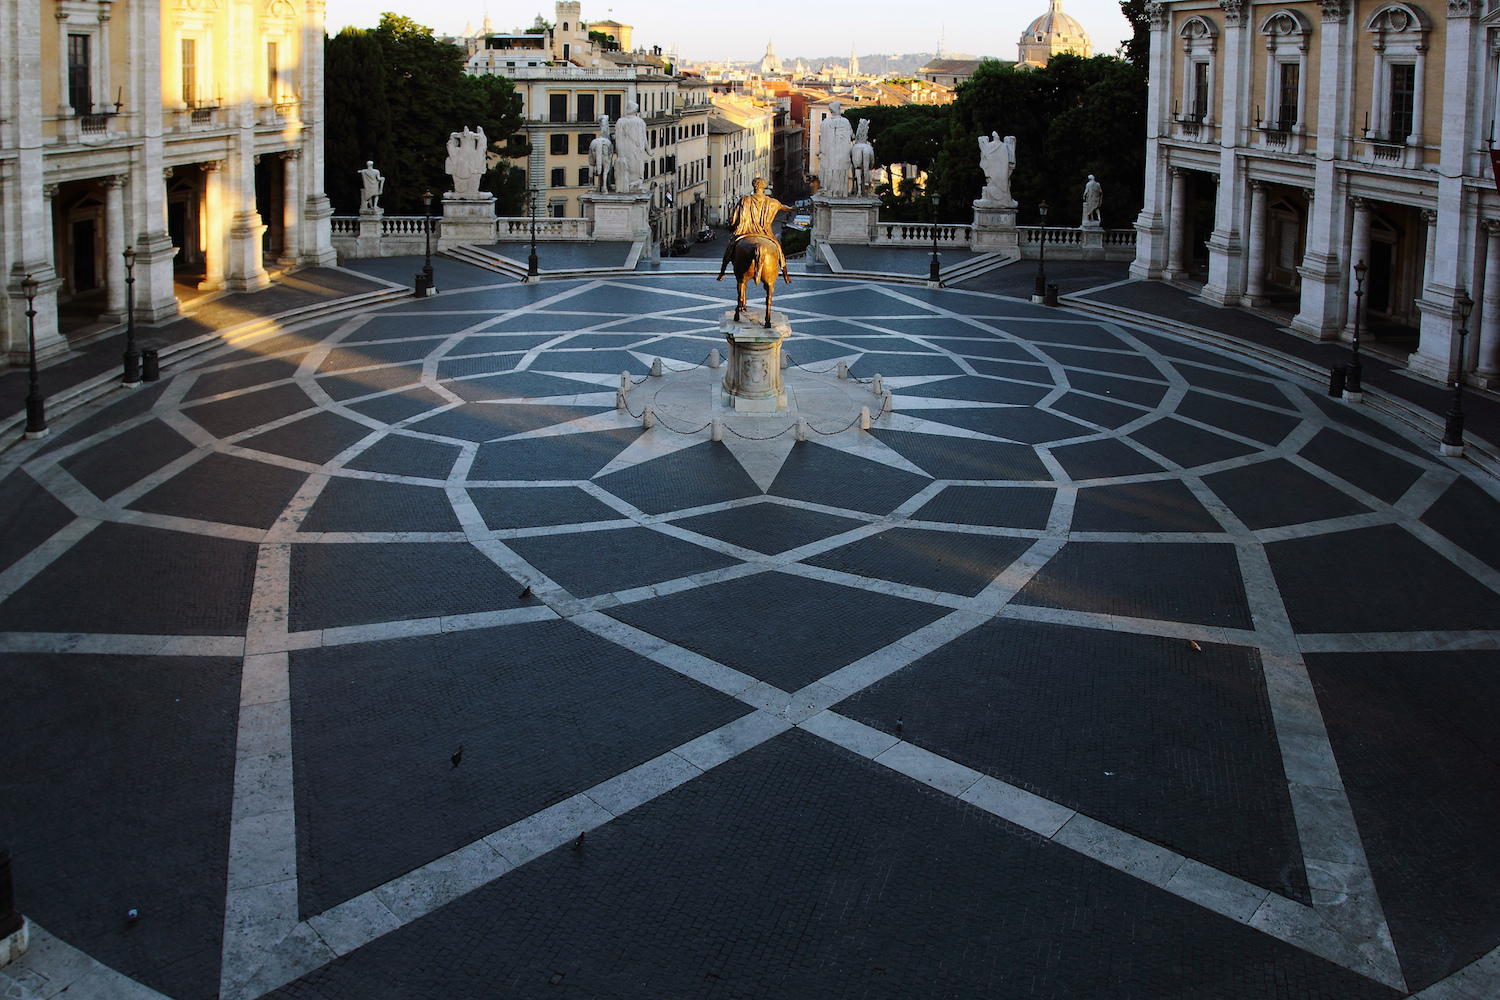 Perfect symetry in the Piazza del Campidoglio. Image by Bruno / CC BY-SA 2.0